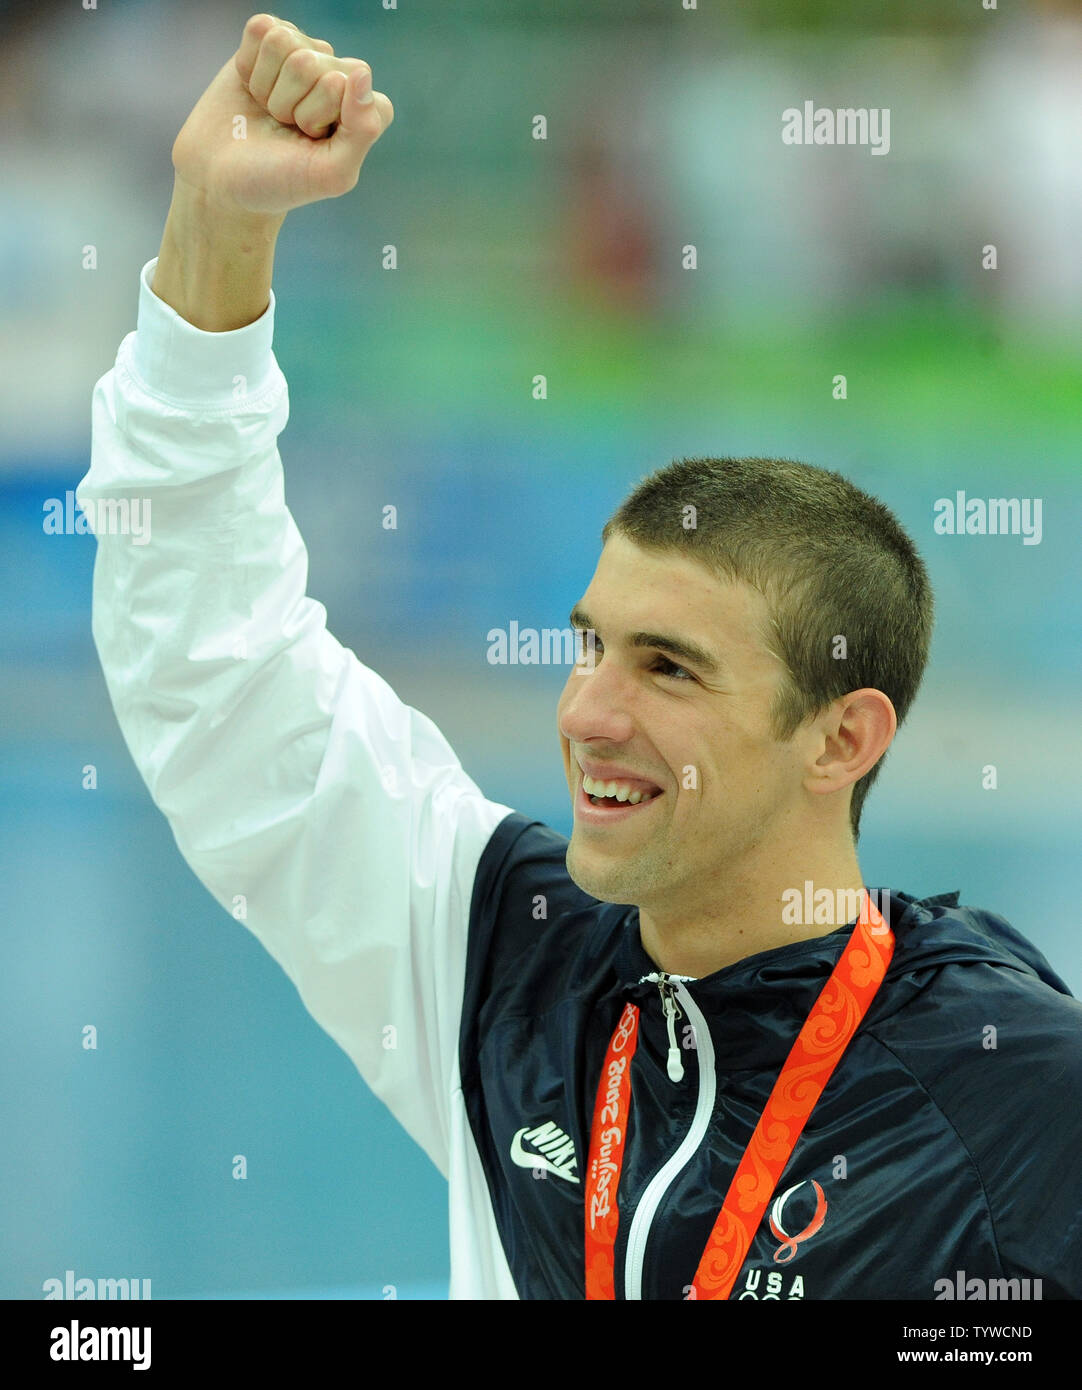 USA's Michael Phelps walks with his medal for his part in the Men's 4x100M Medley, where the US team set a world record and won gold, at the National Aquatic Center (Water Cube) during the 2008 Summer Olympics in Beijing, China, on August 17, 2008.  Phelps set the world record for medals in a single Olympics with 8, passing Mark Spitz.    (UPI Photo/Roger L. Wollenberg) Stock Photo